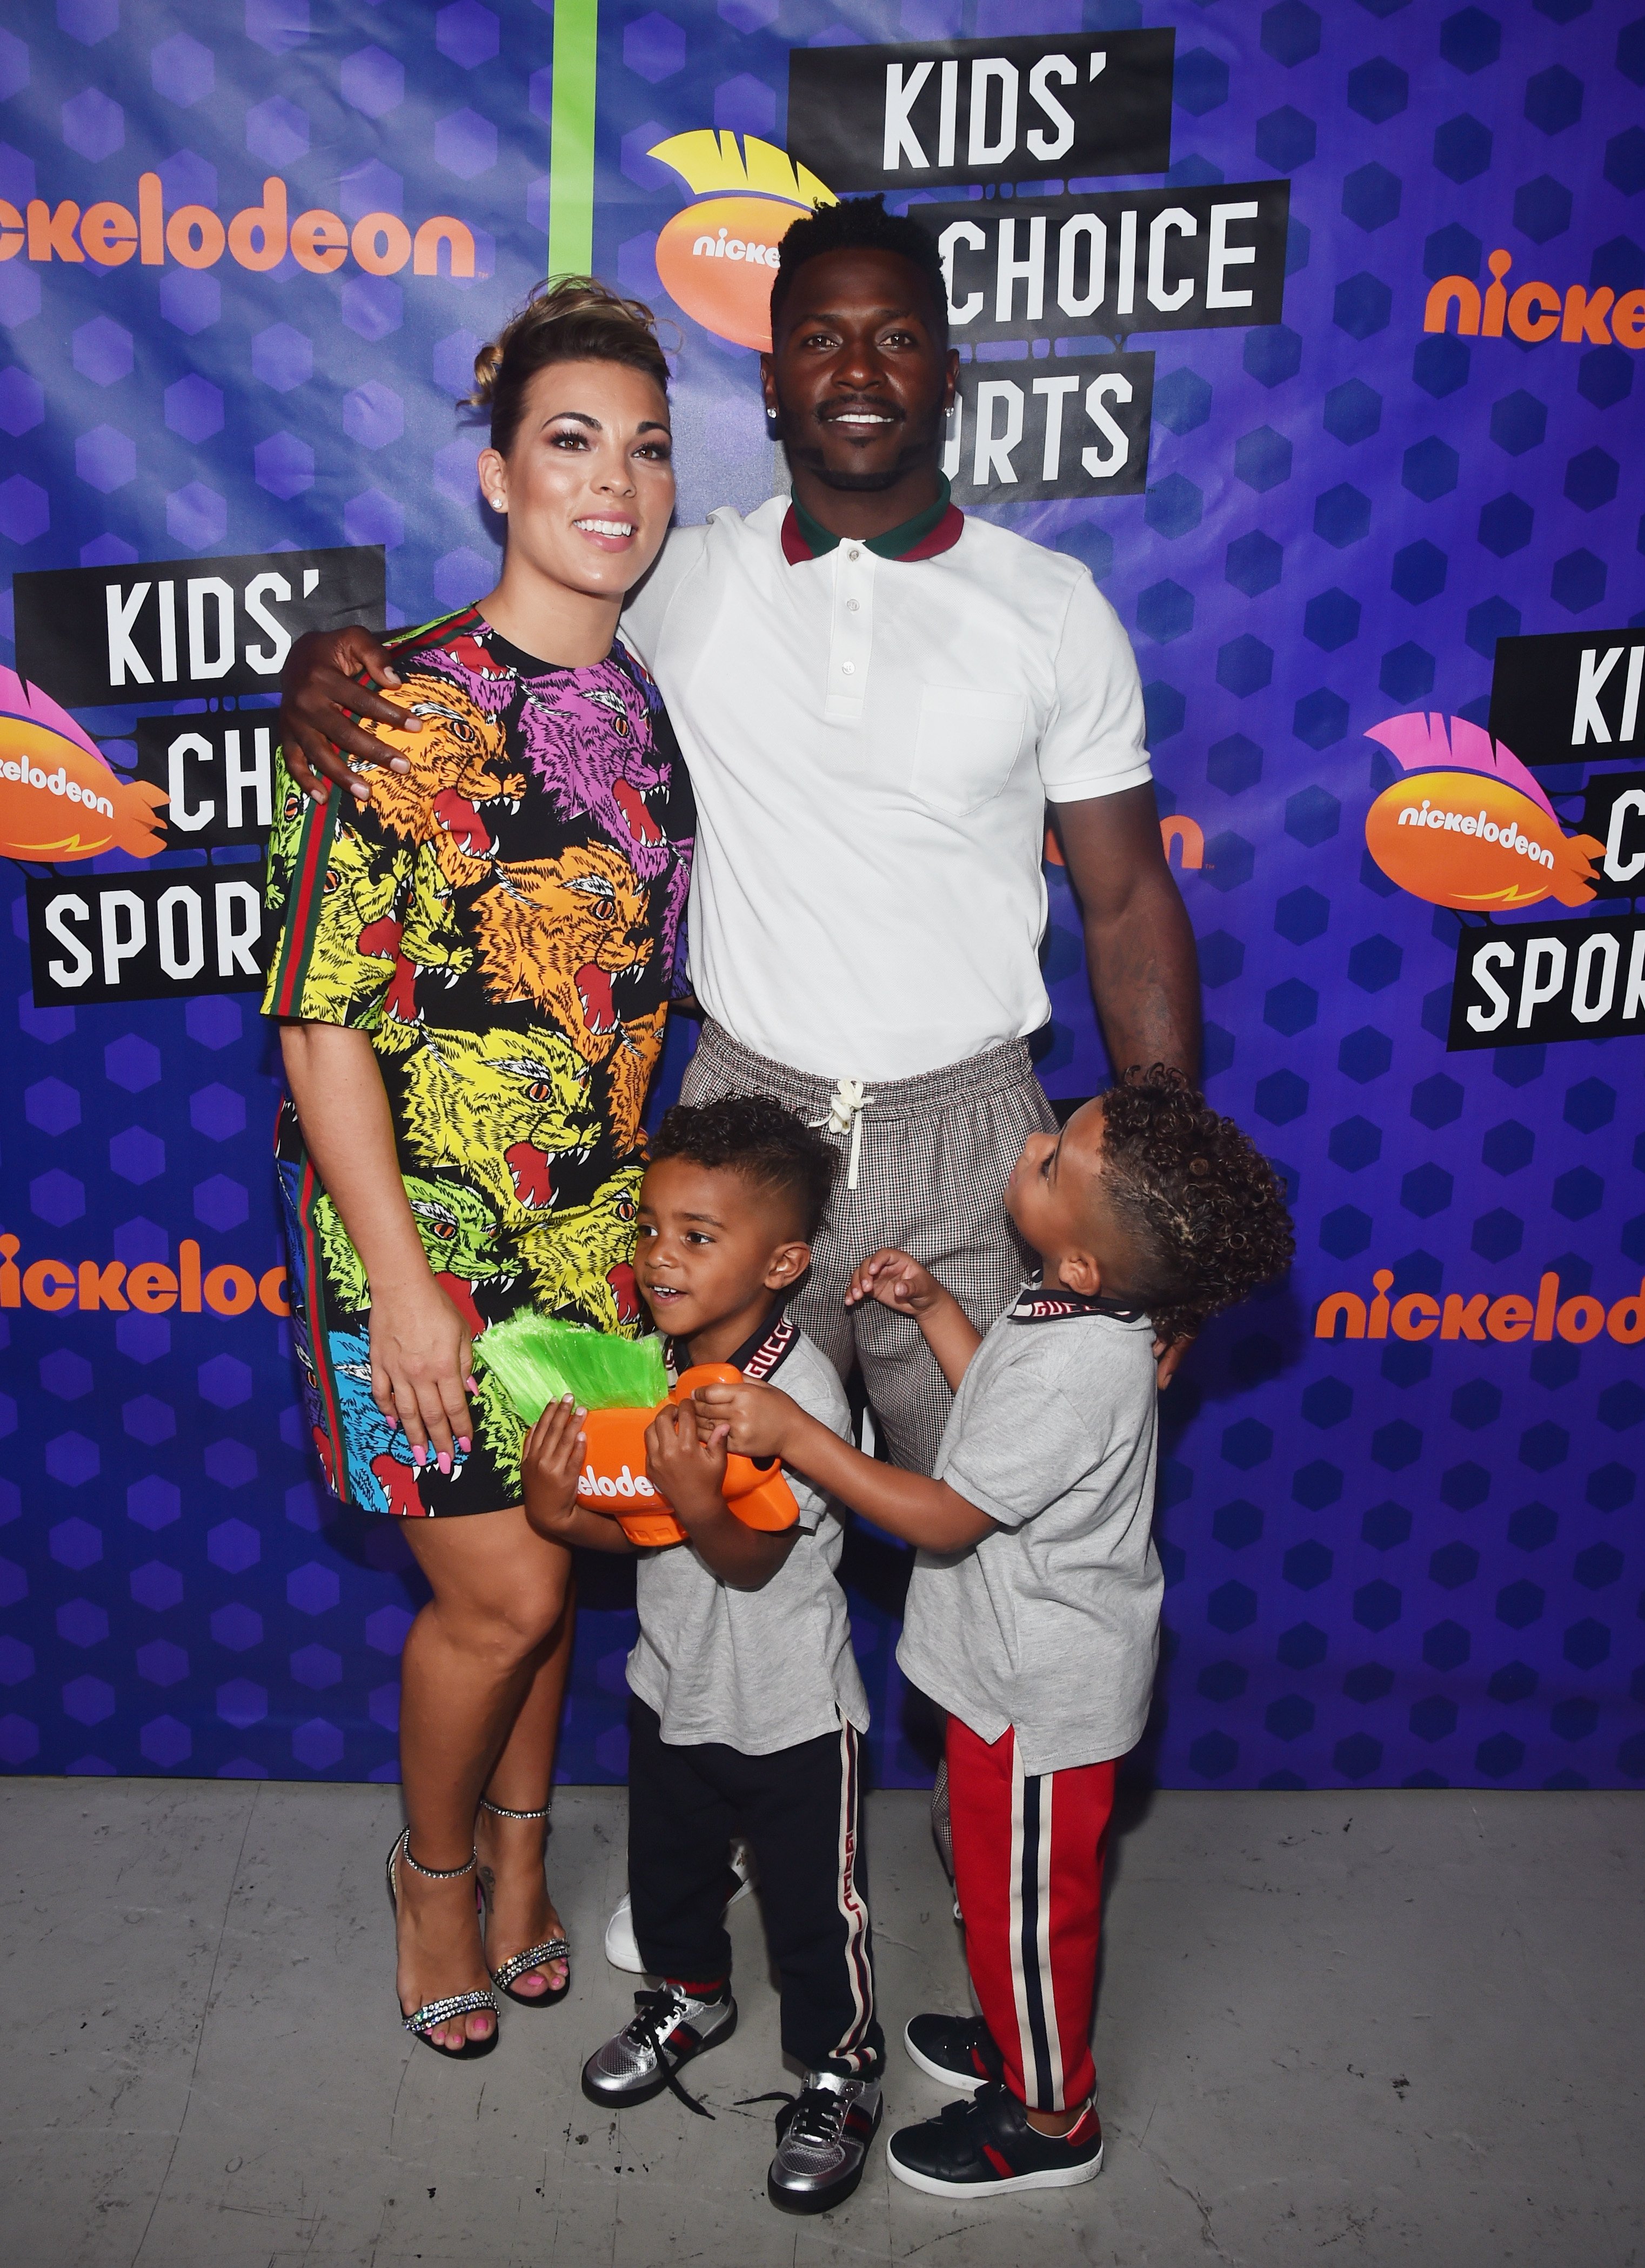 Chelsie Kyriss (L) and NFL player Antonio Brown pose backstage at the Nickelodeon Kids' Choice Sports 2018 at Barker Hangar on July 19, 2018 in Santa Monica, California. | Source: Getty Images